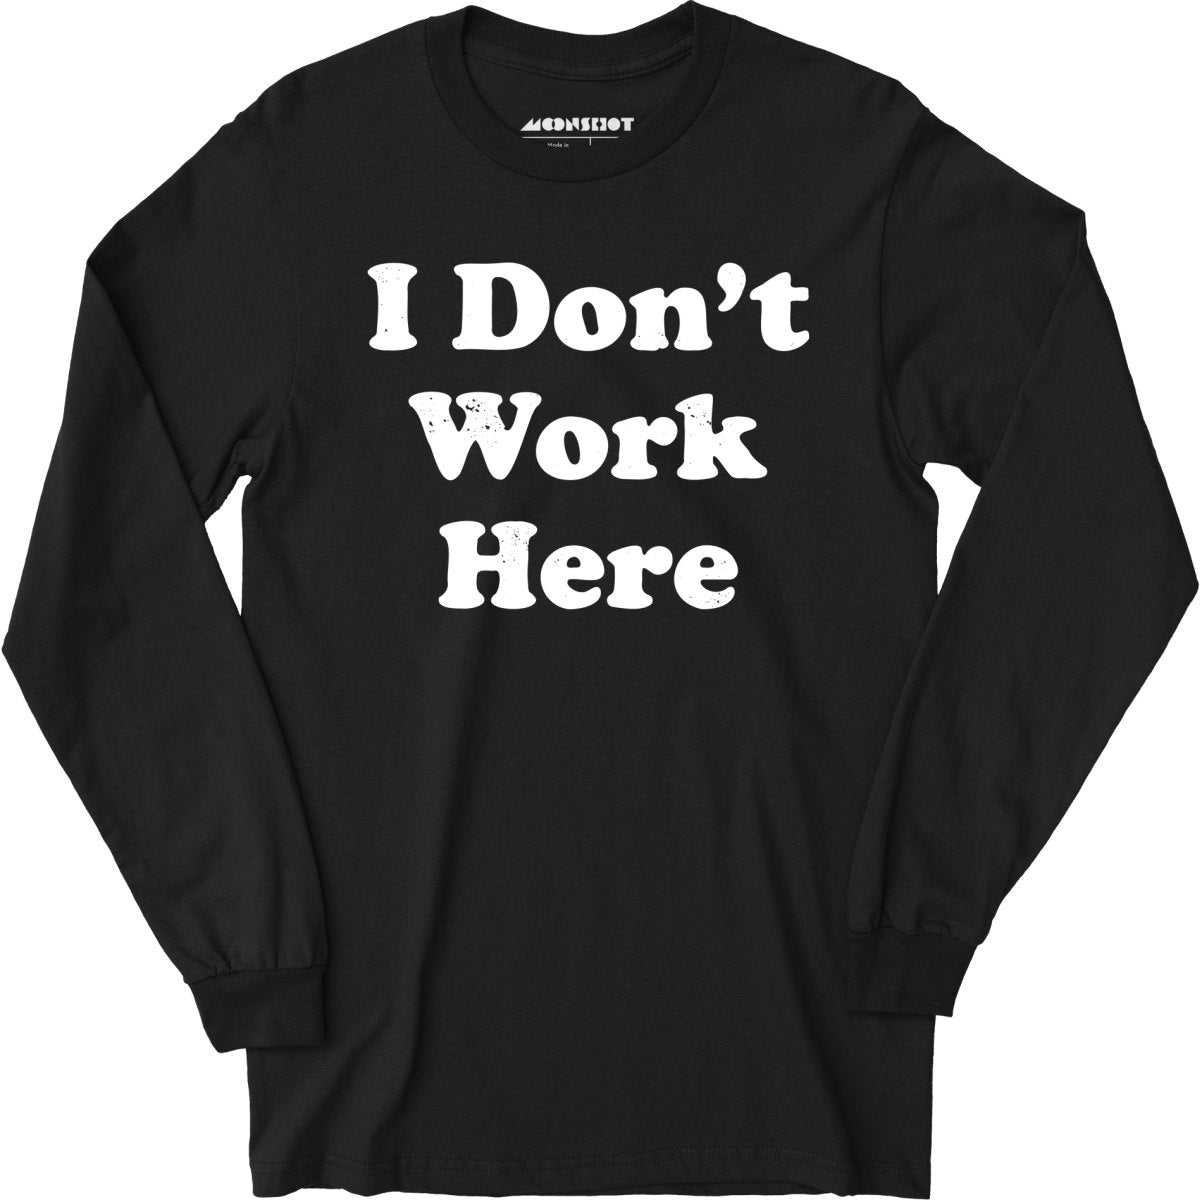 I Don't Work Here - Long Sleeve T-Shirt